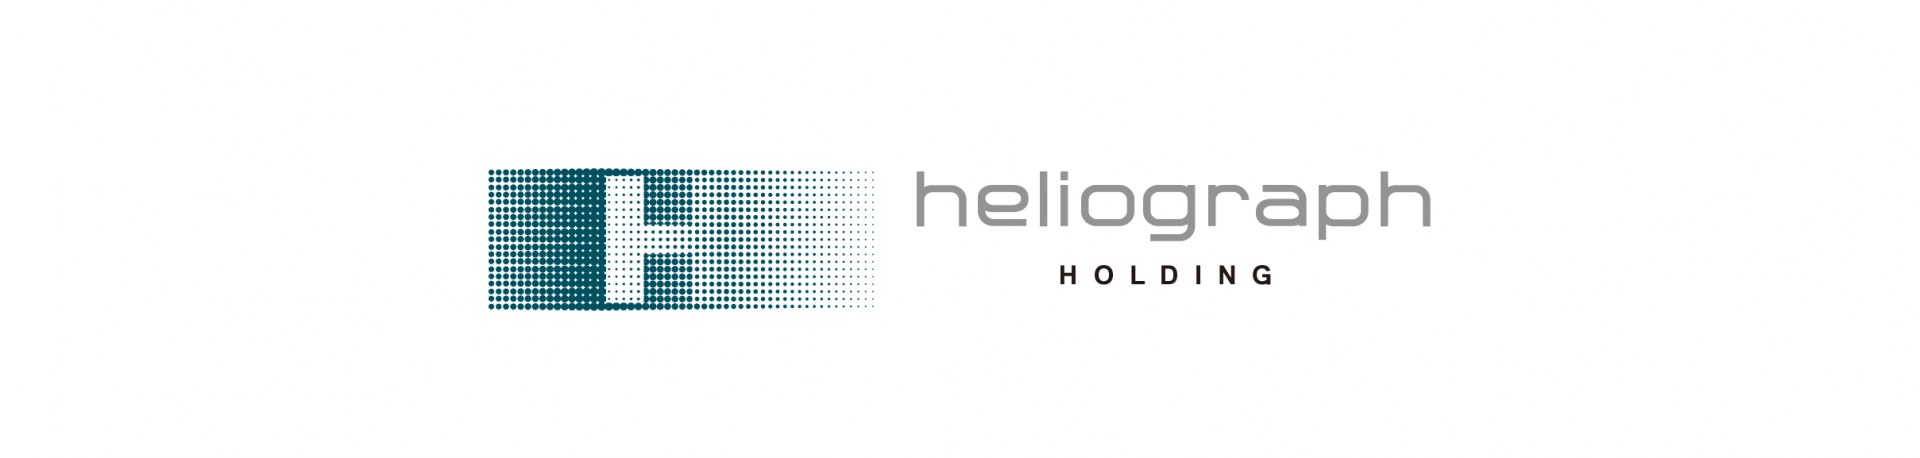 Digiflex is now the sole distributor of Heliograph Holding in Thailand